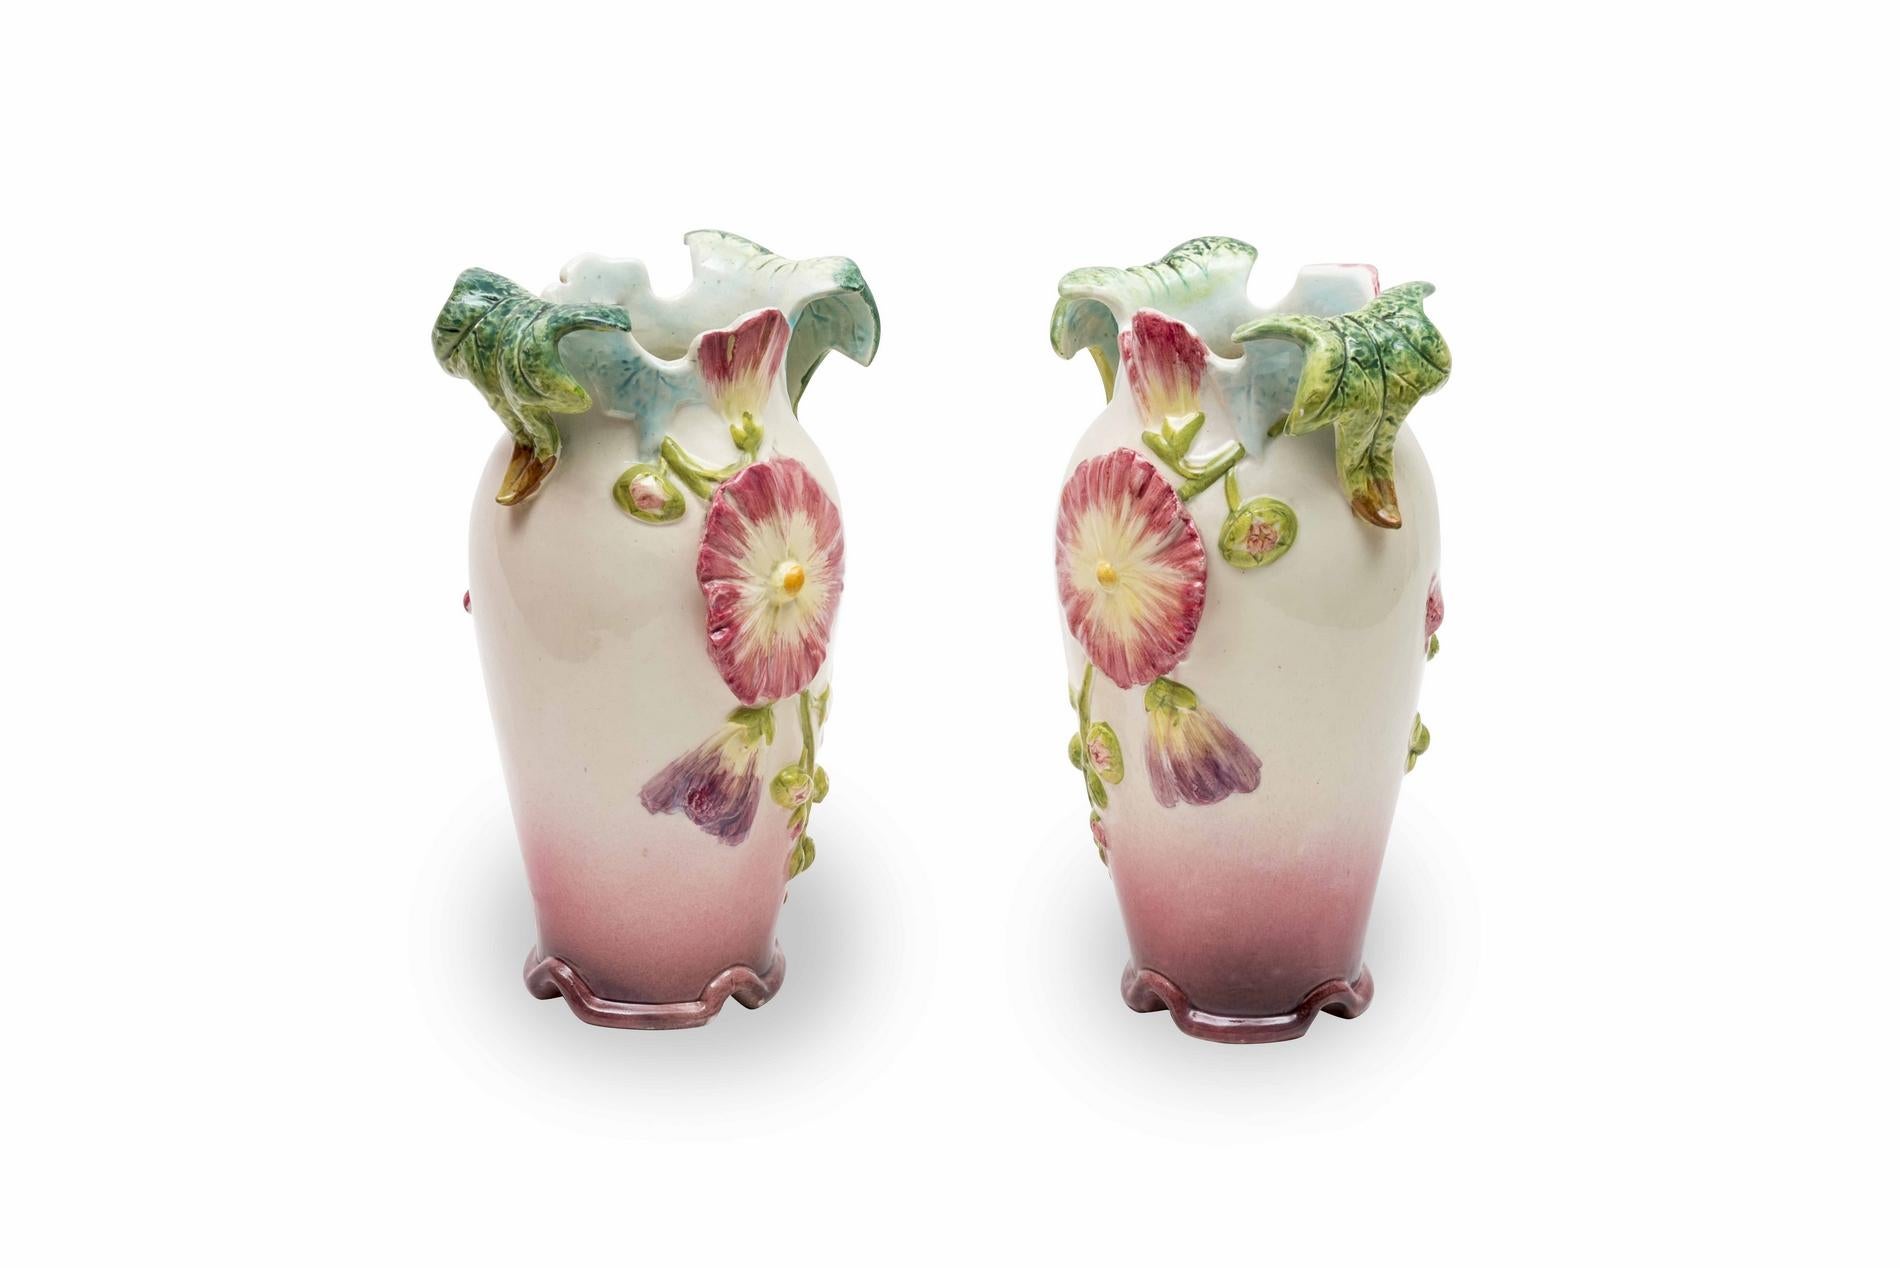 Pair of pink, purple and blue floral vases. The belly is decorated with a branch of flowers. A slight indentation at the bottom allows a good stability to the whole. The vase ends with a neck that is cut according to the petals of the flowers and,